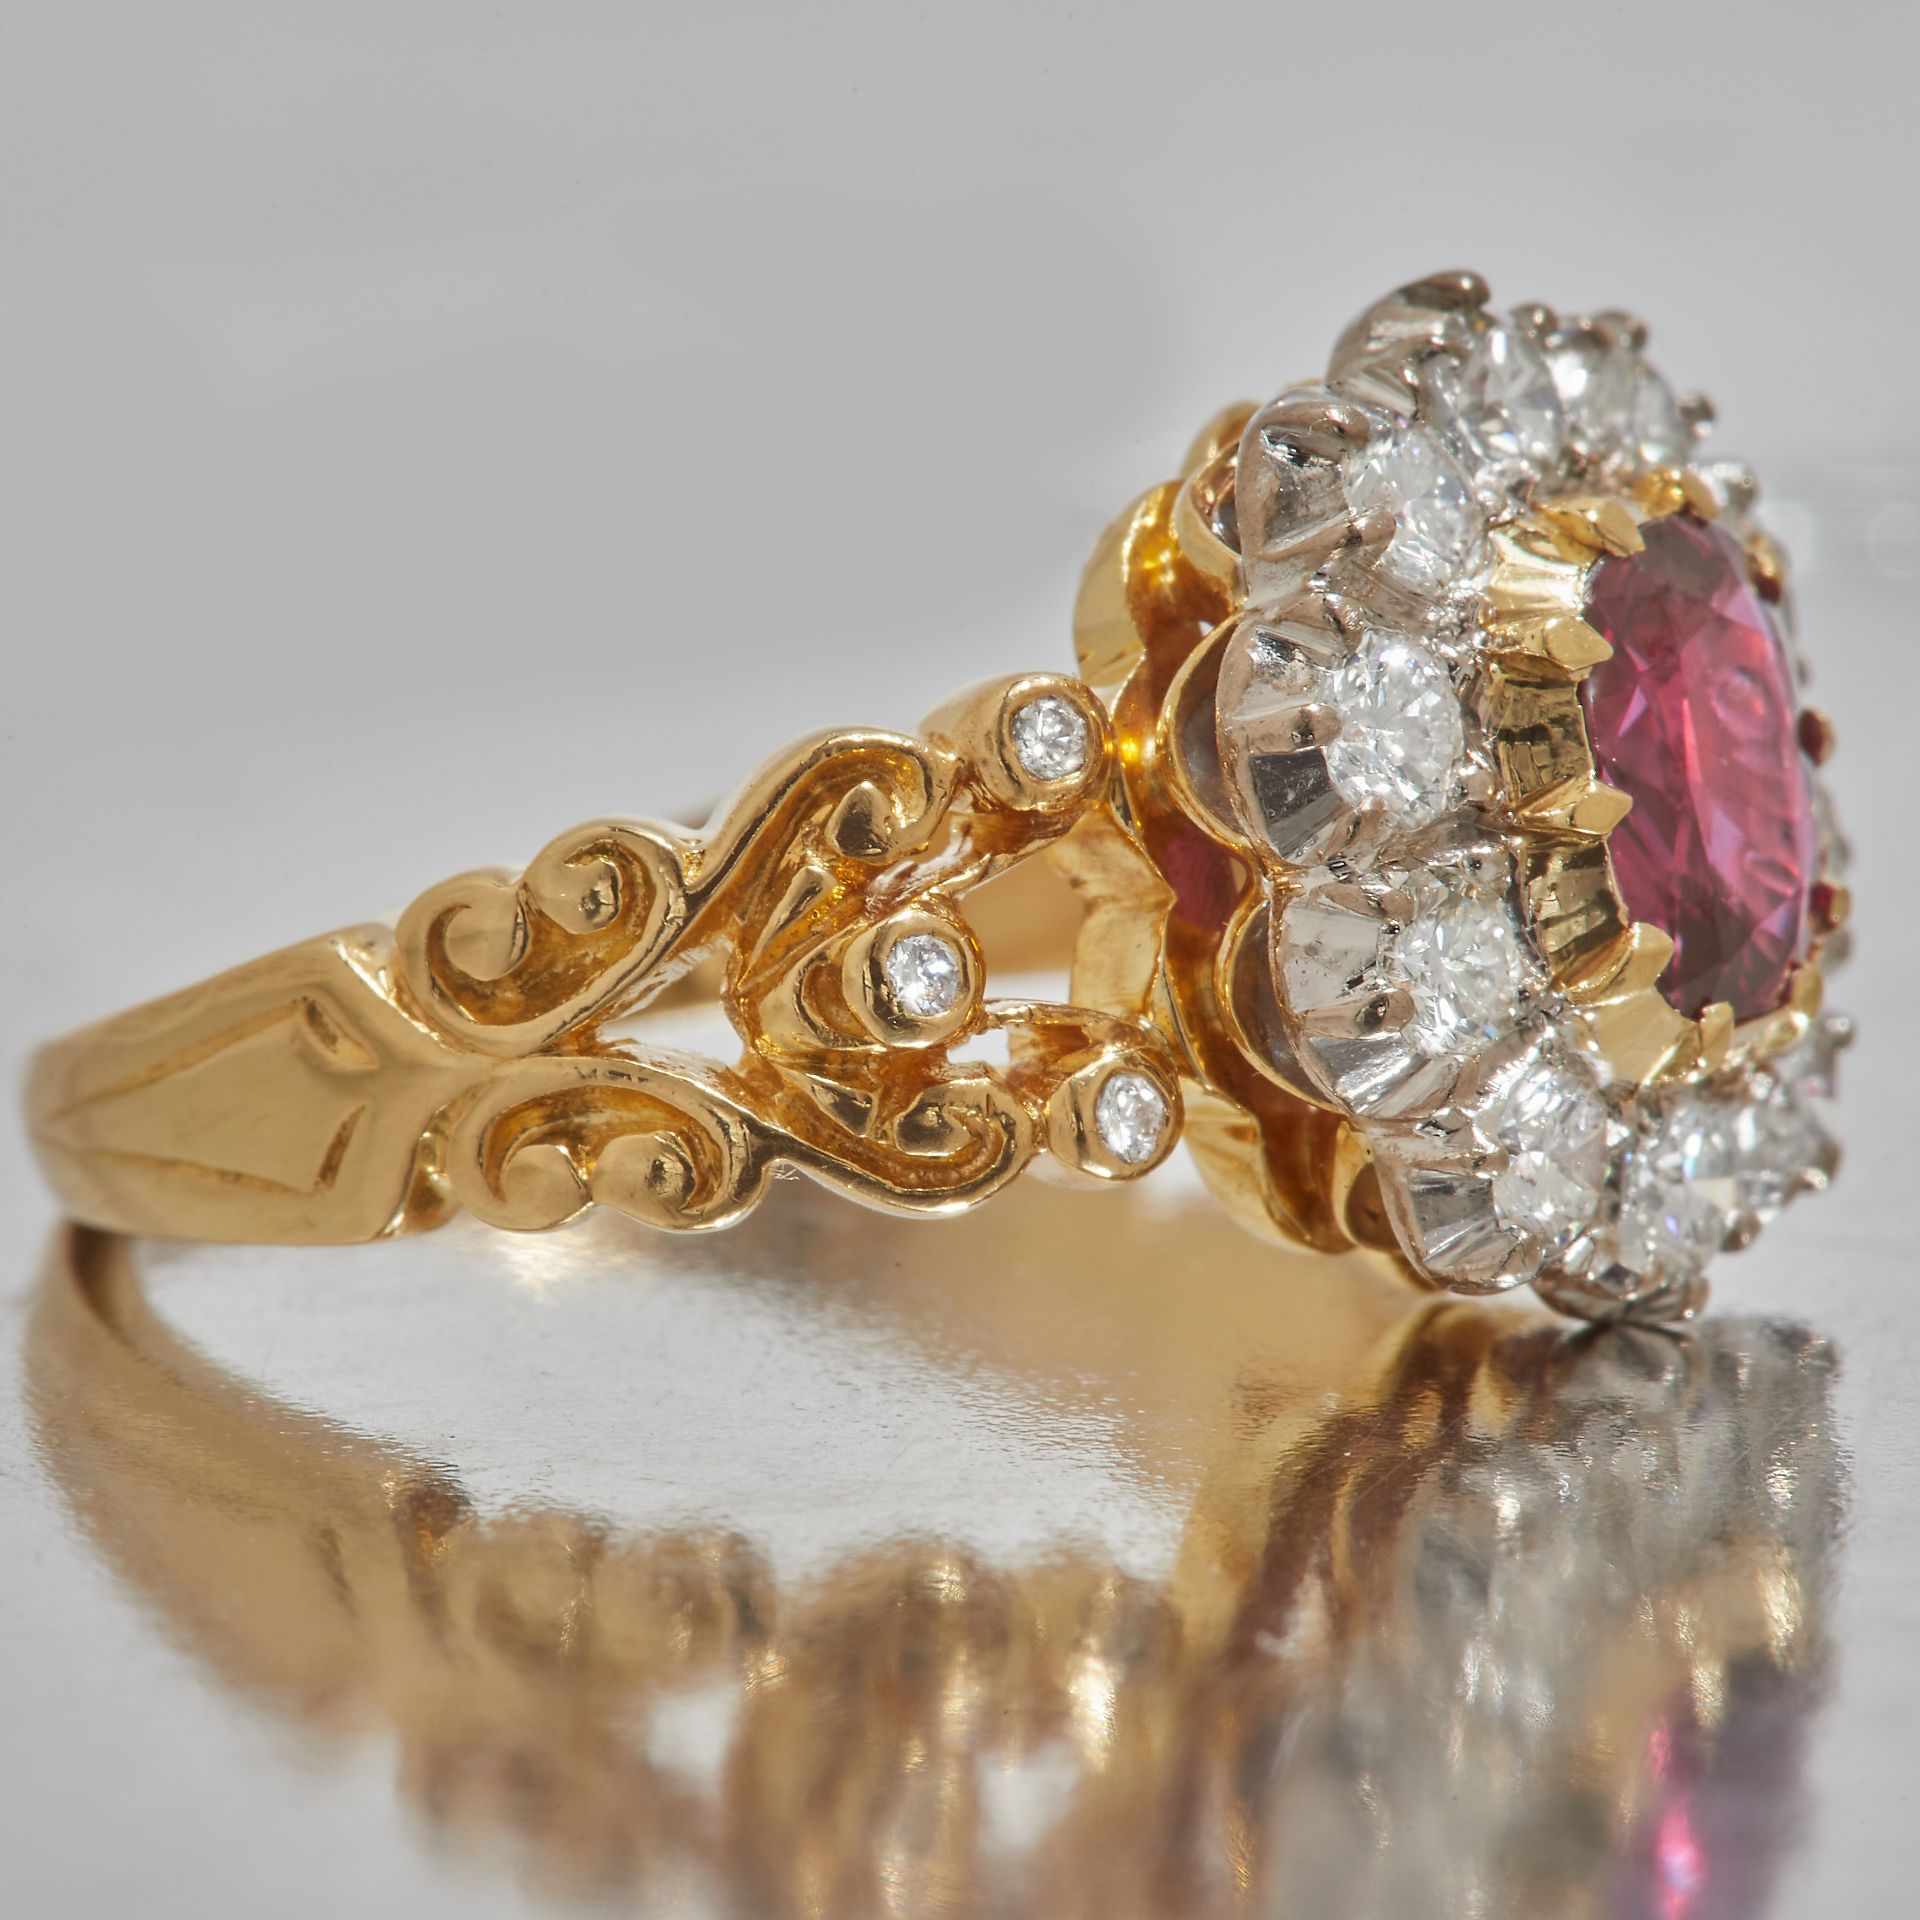 RUBY AND DIAMOND CLUSTER RING - Image 2 of 2